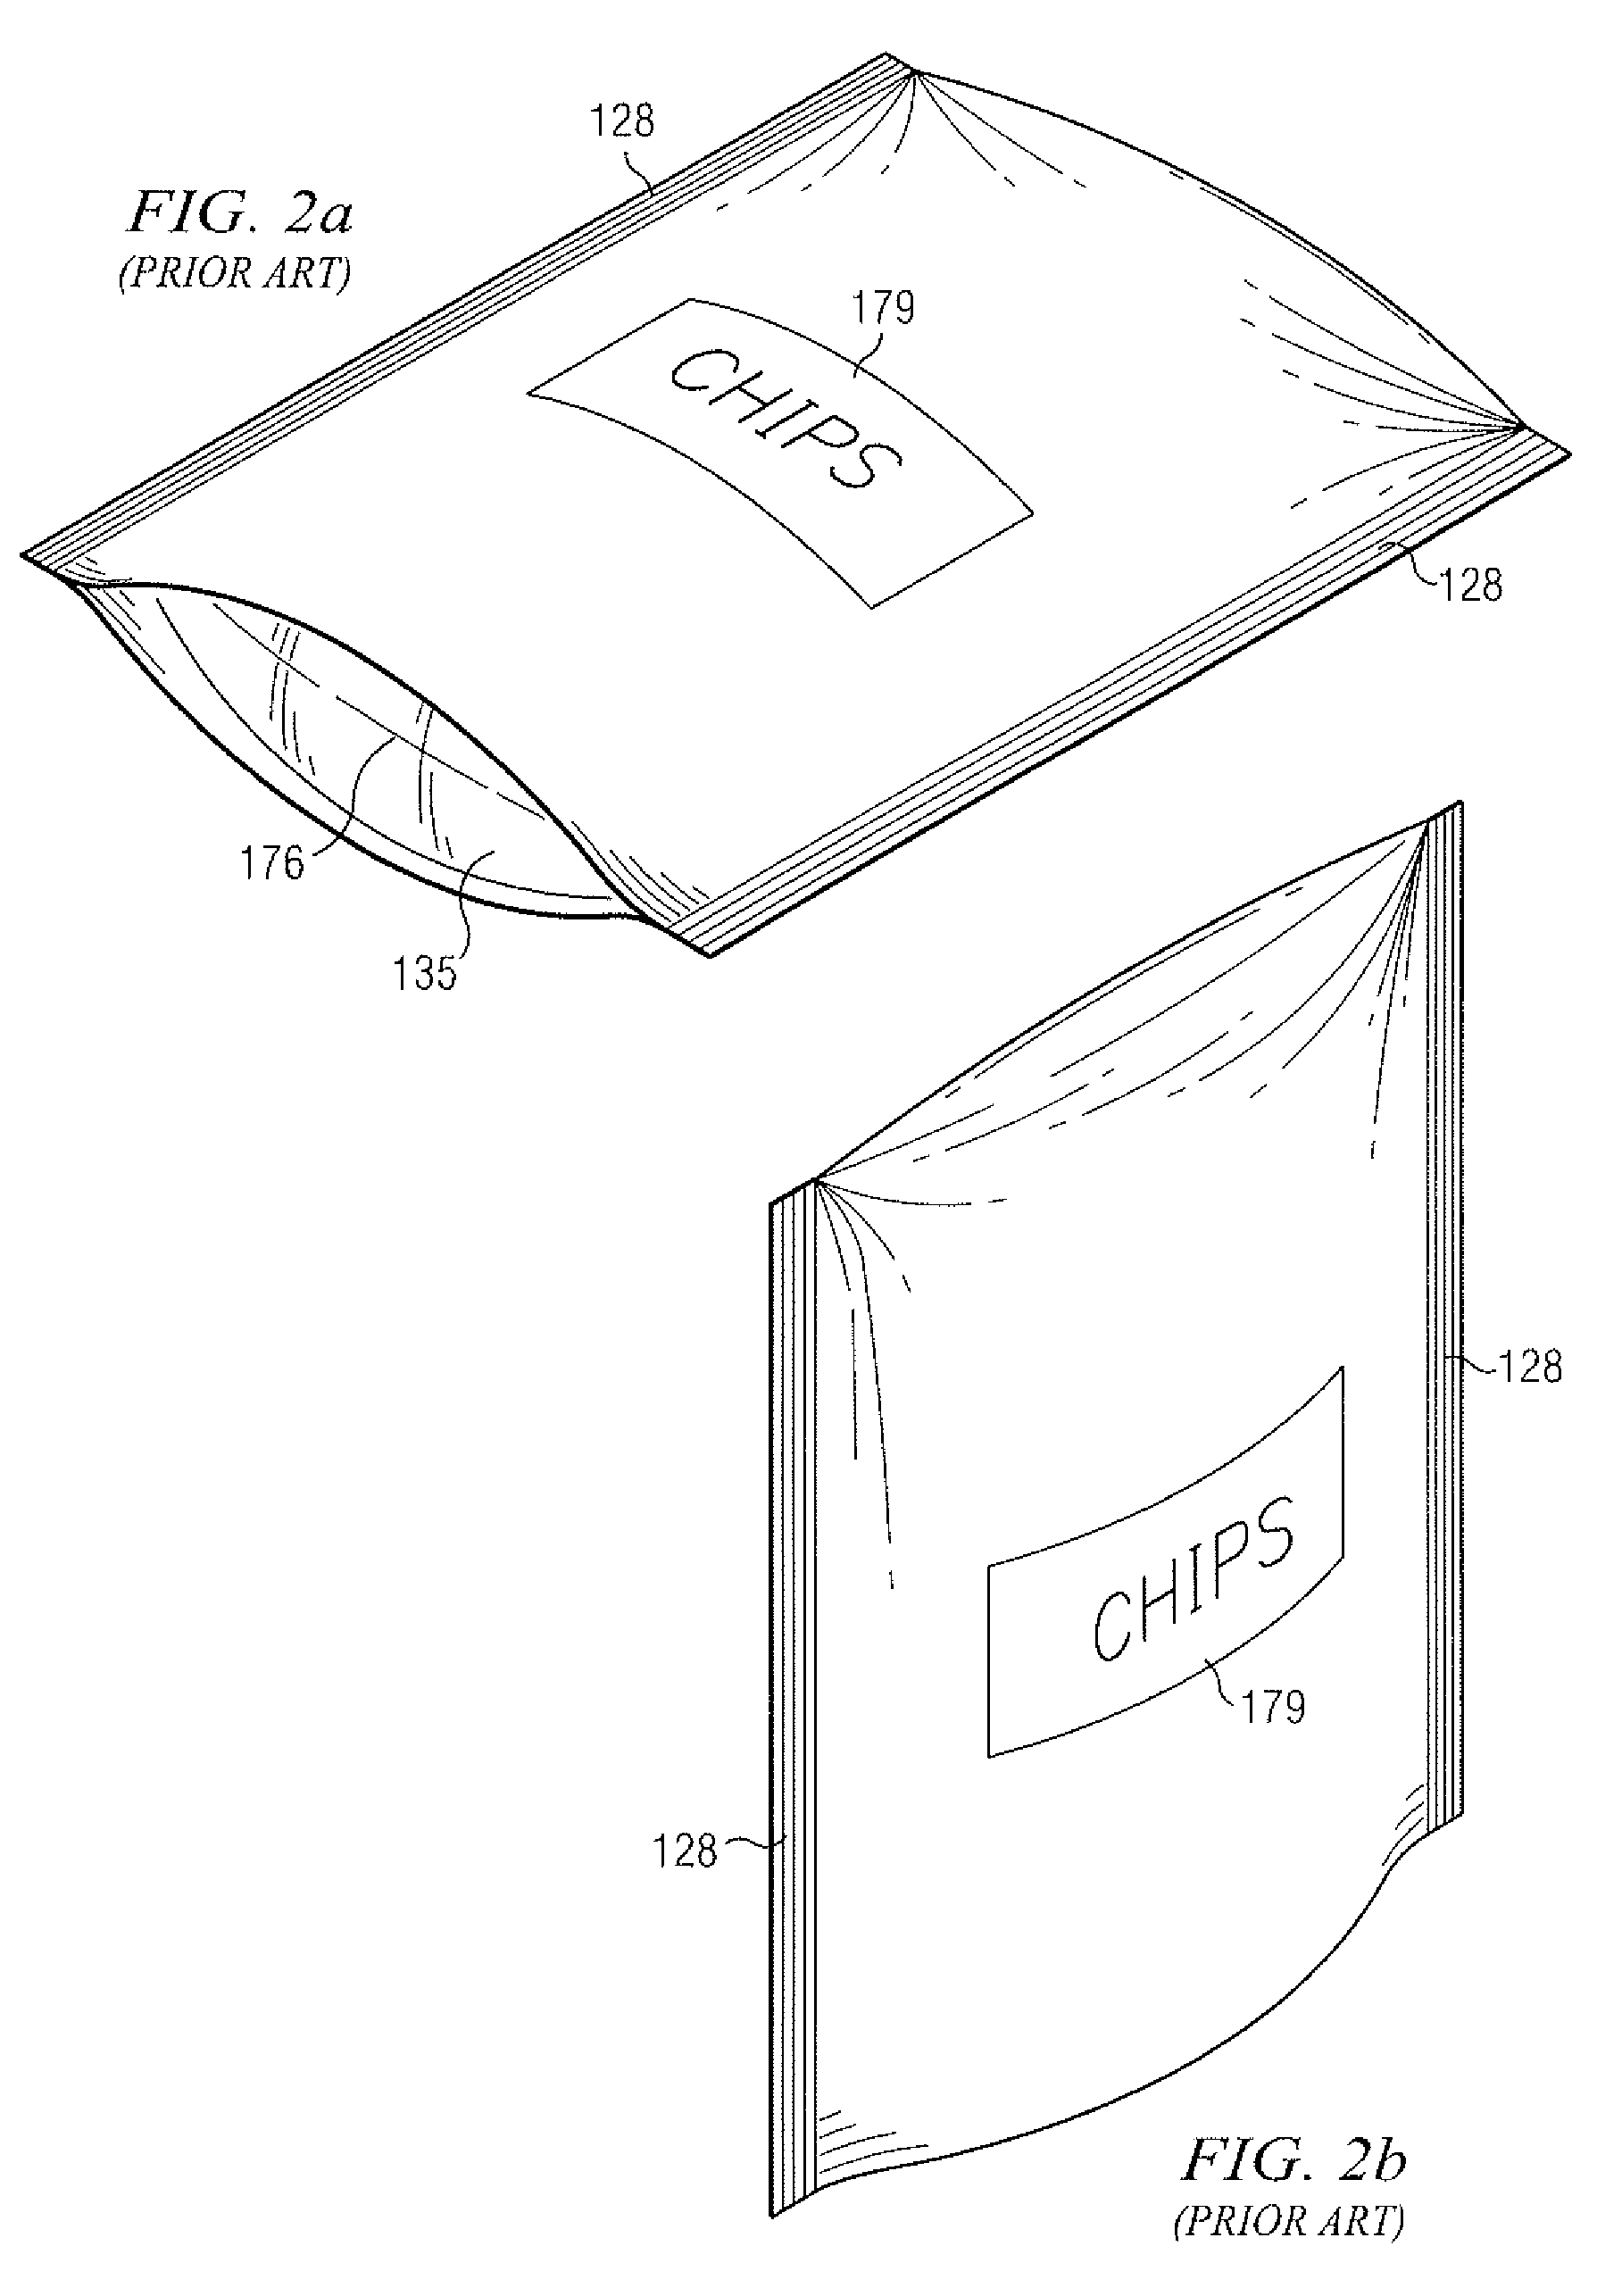 Method for making a multi-compartment microwavable package having a permeable wall between compartments